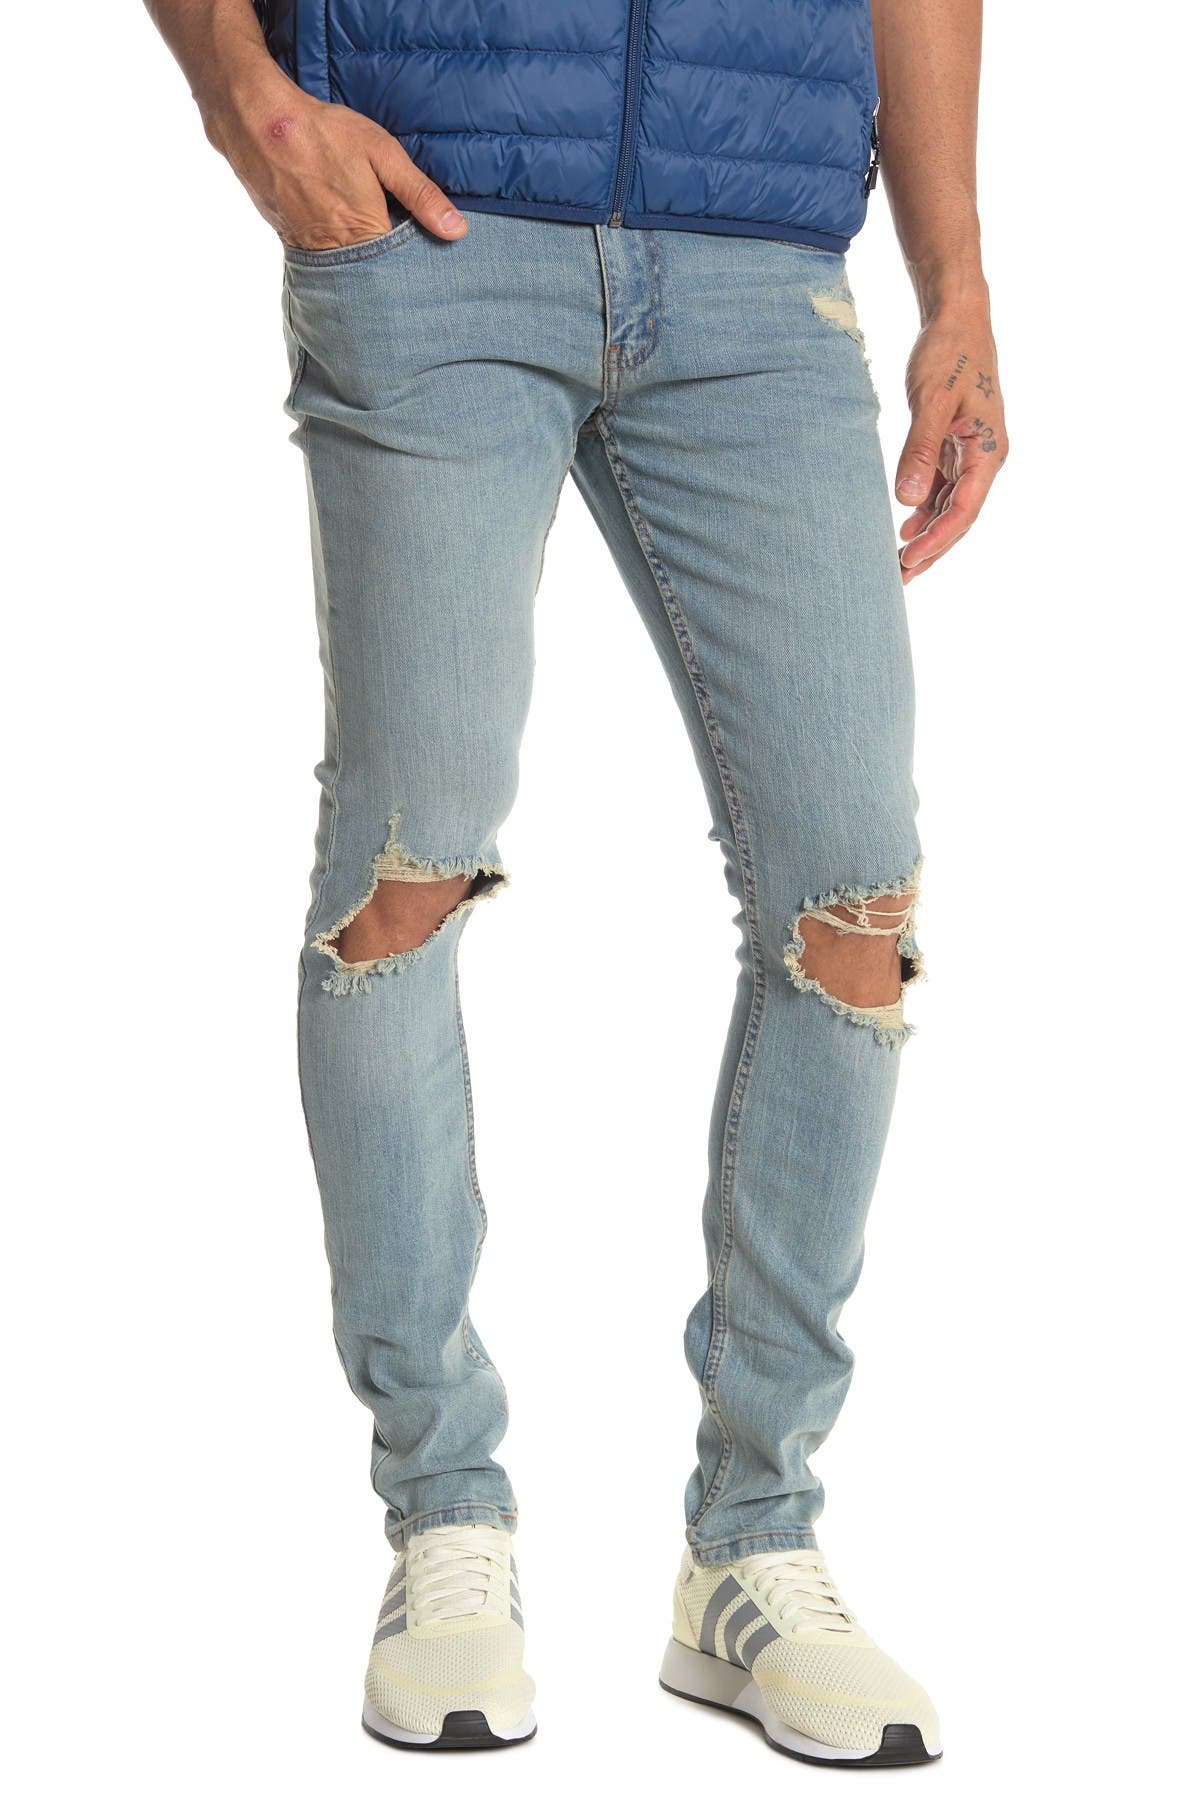 stretch jeans for guys